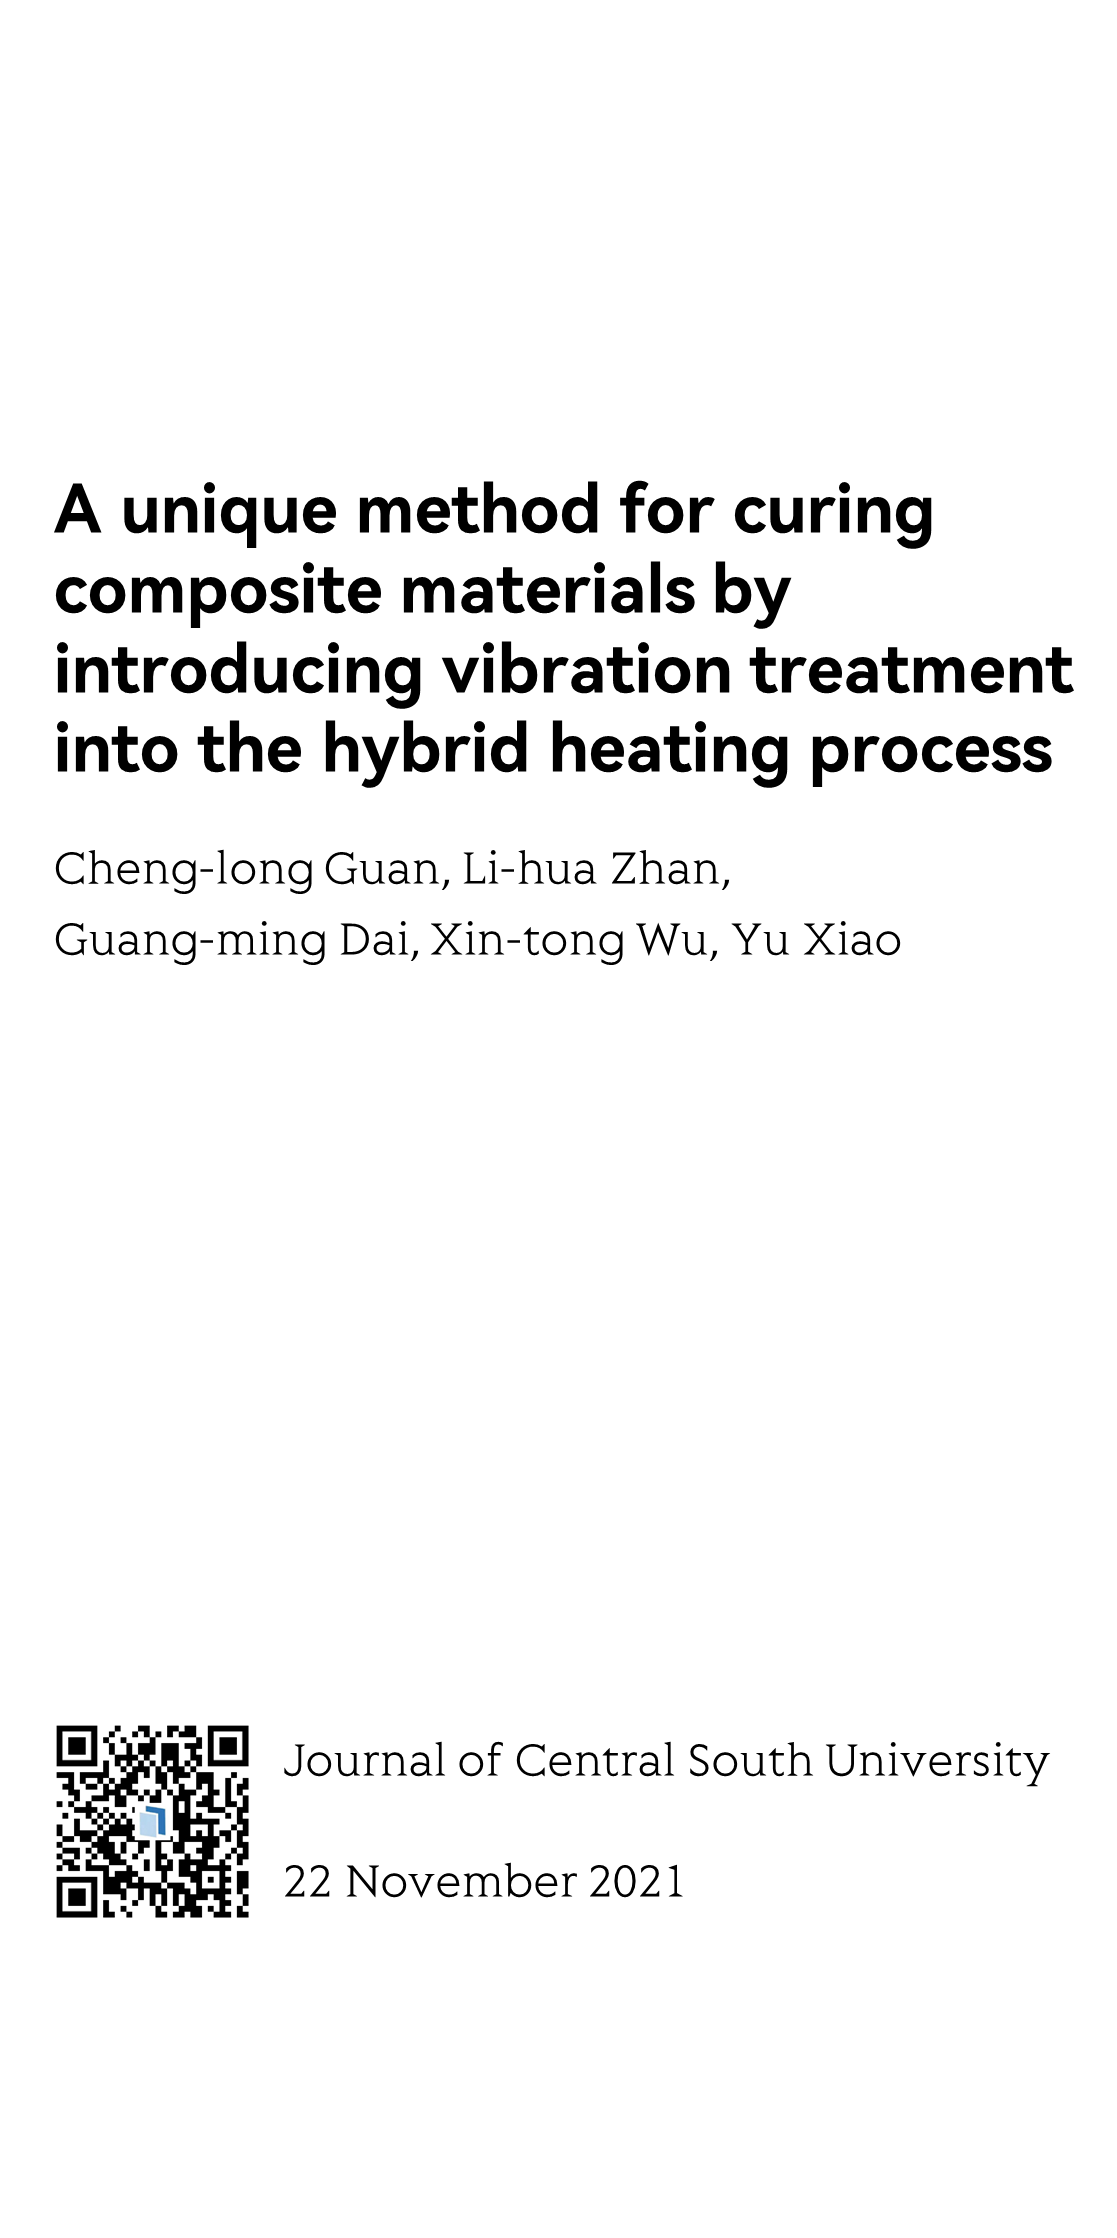 A unique method for curing composite materials by introducing vibration treatment into the hybrid heating process_1